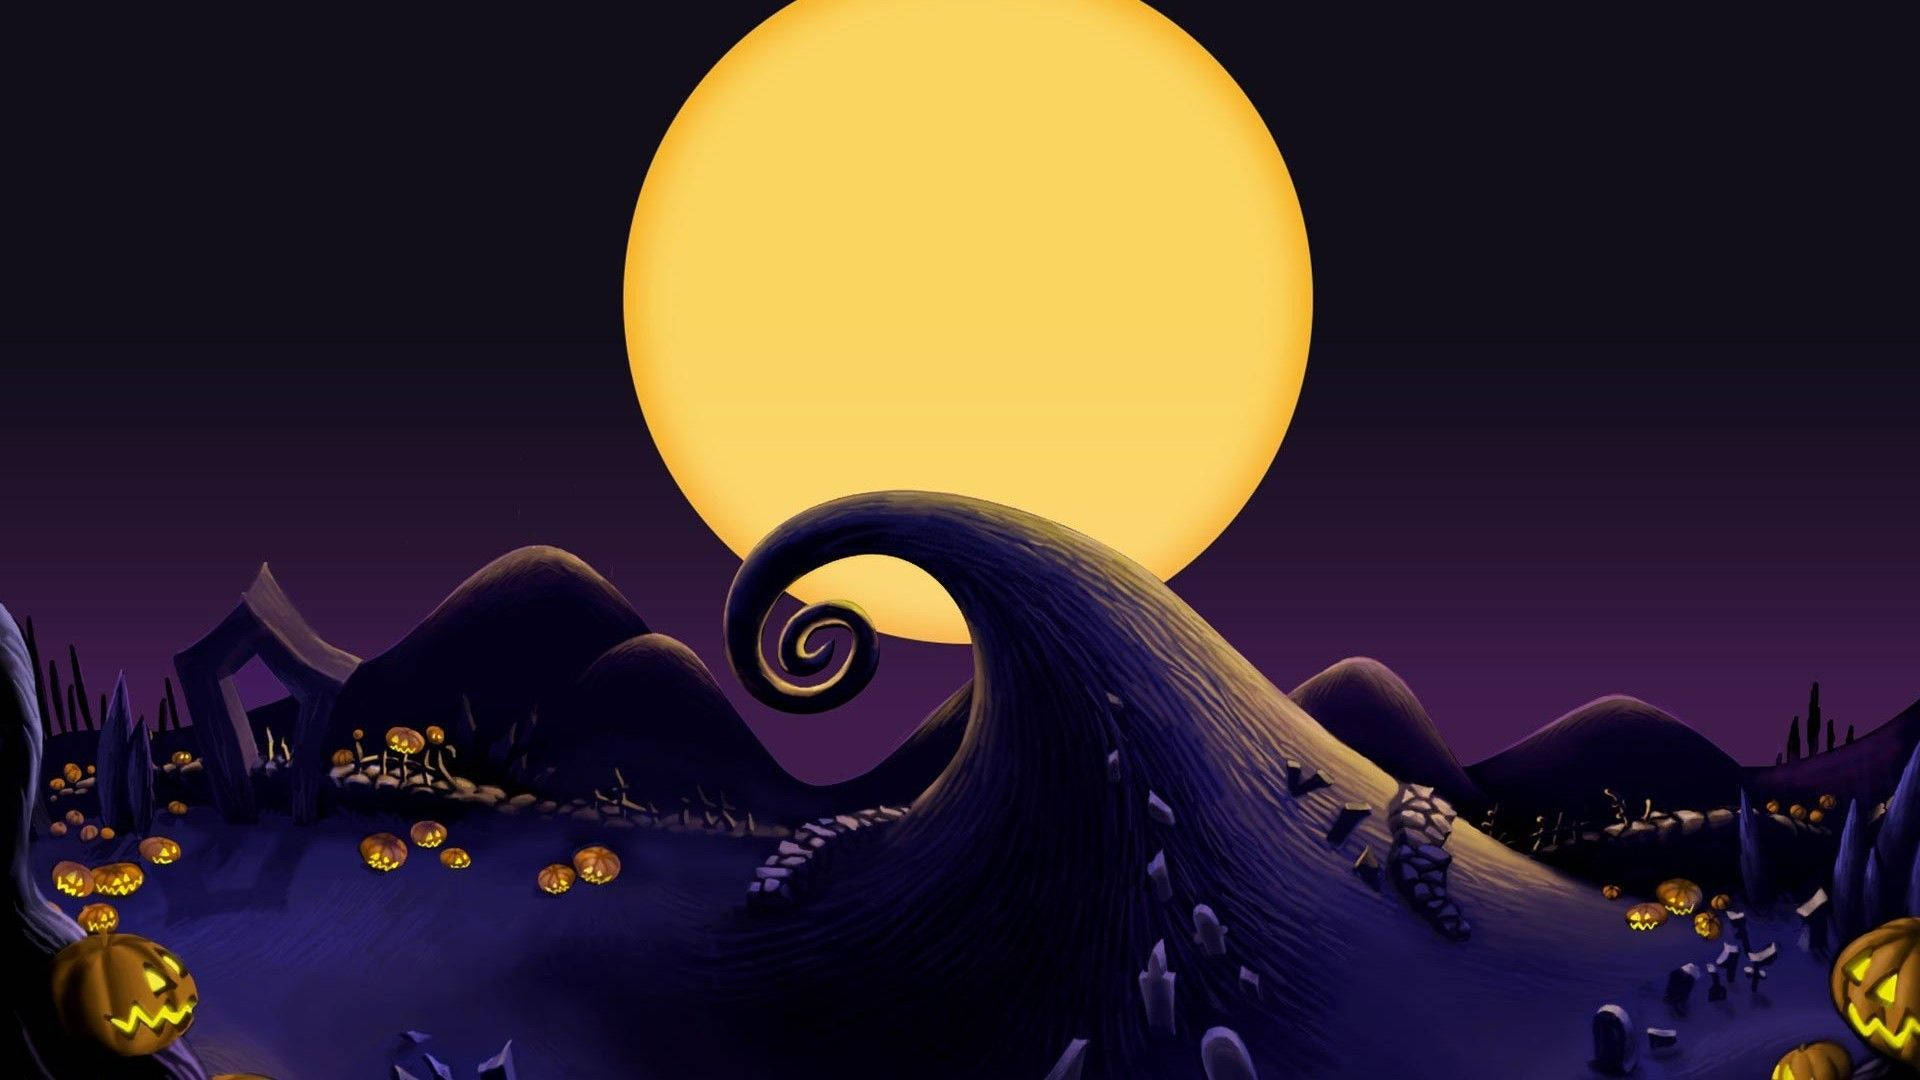 The Nightmare Before Christmas Landscape